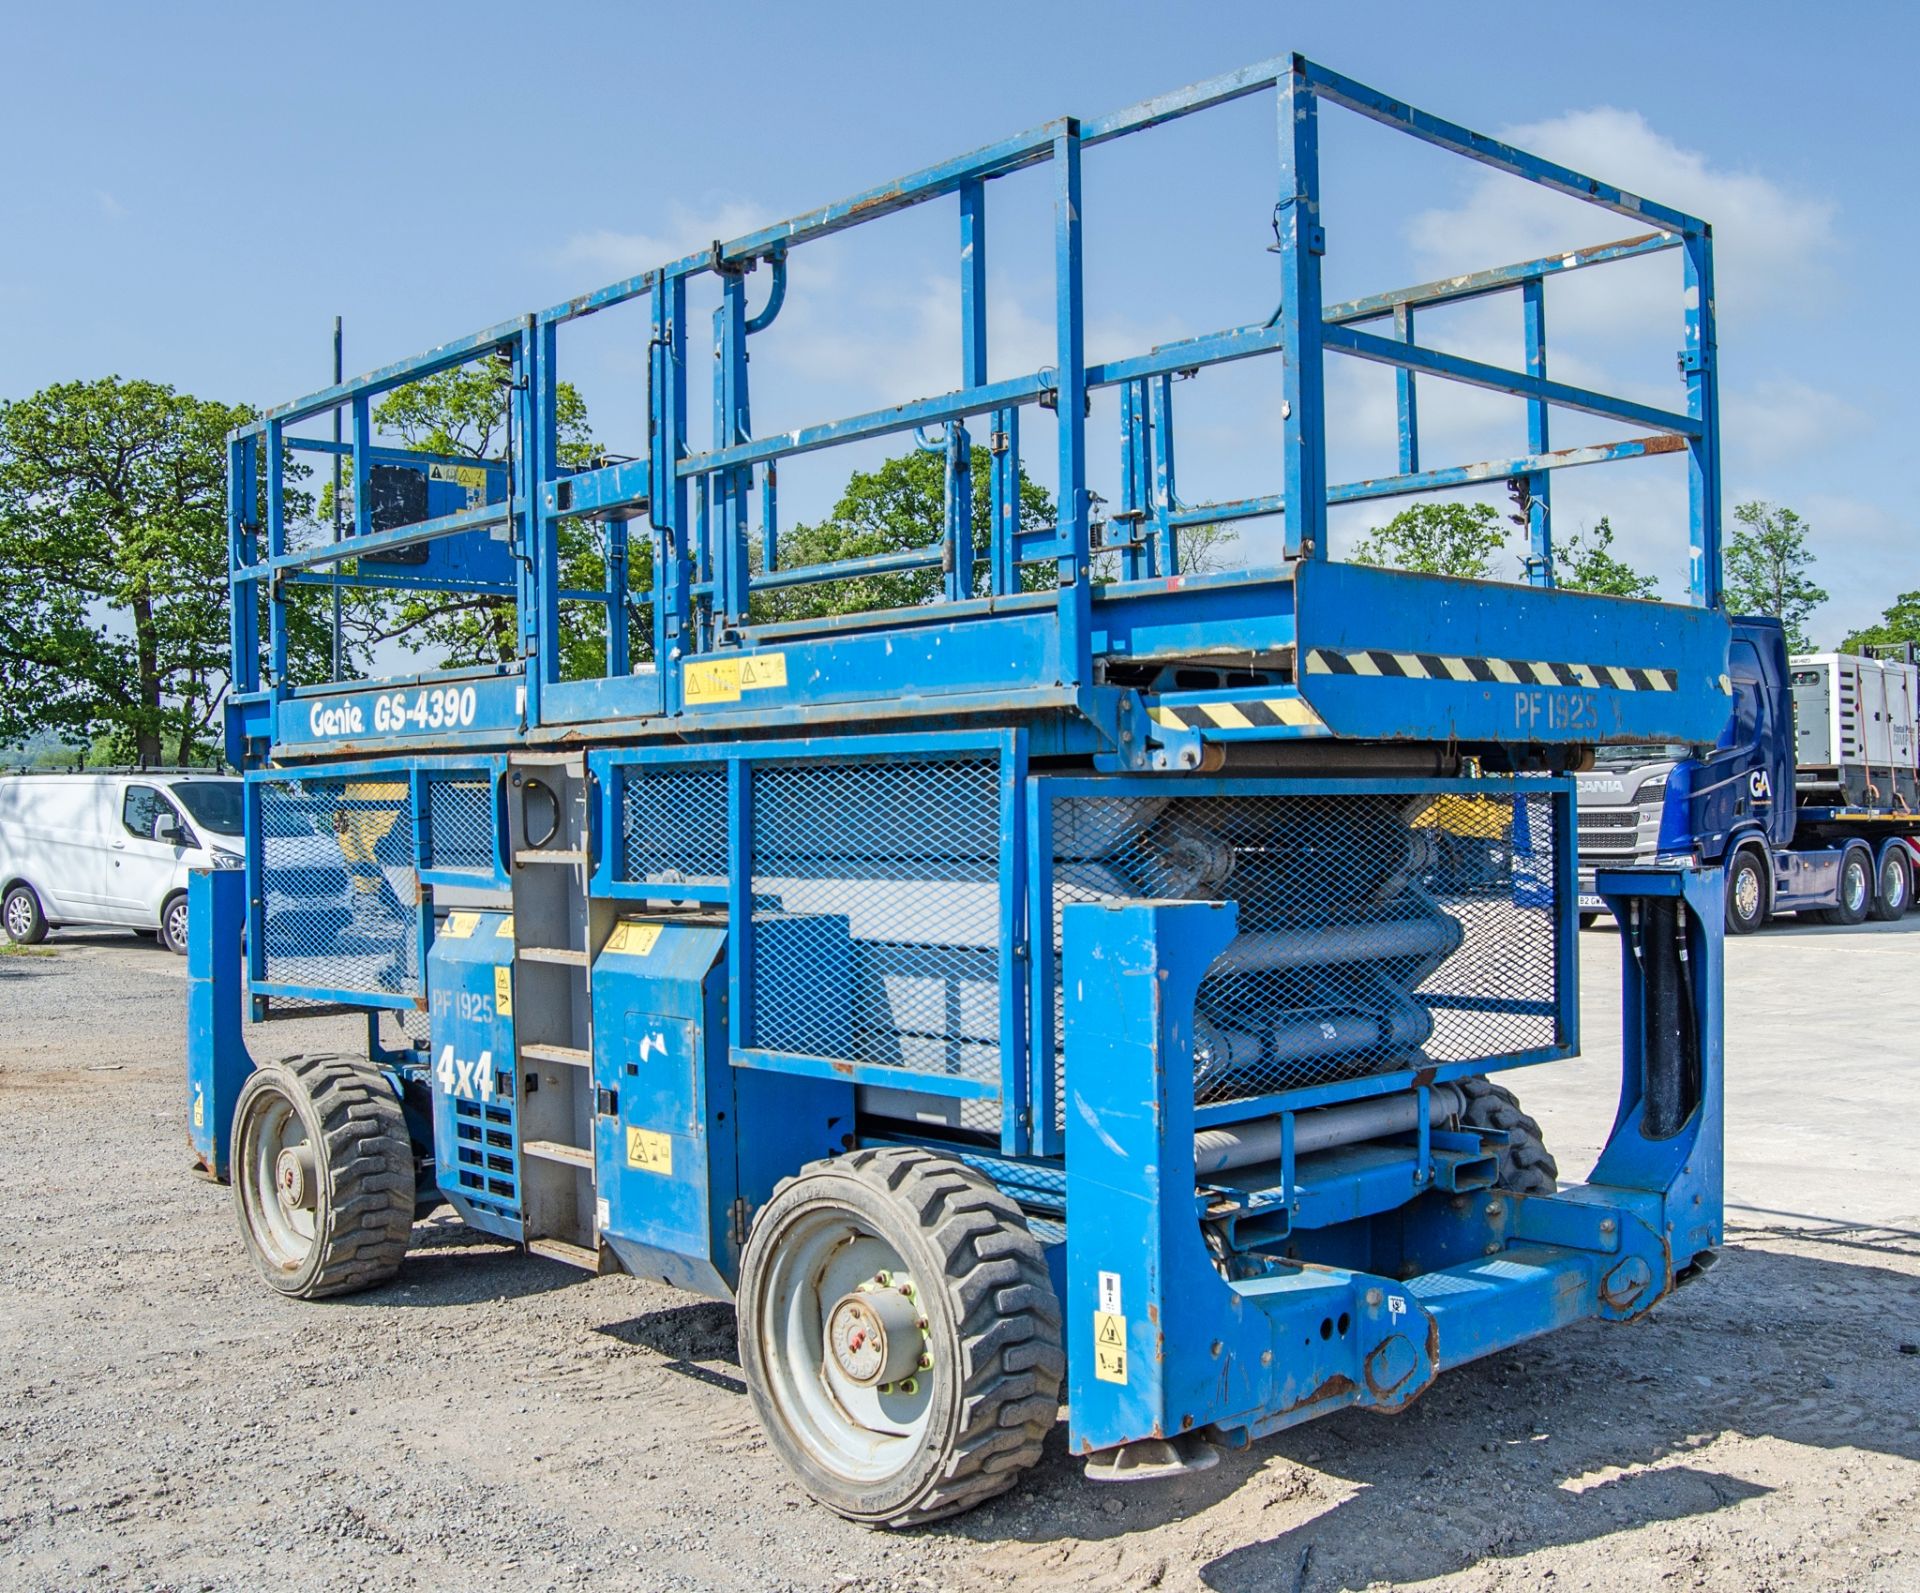 Genie GS4390 diesel driven scissor lift access platform Year: 2014 S/N: 49379 Recorded Hours: 1886 - Image 4 of 17